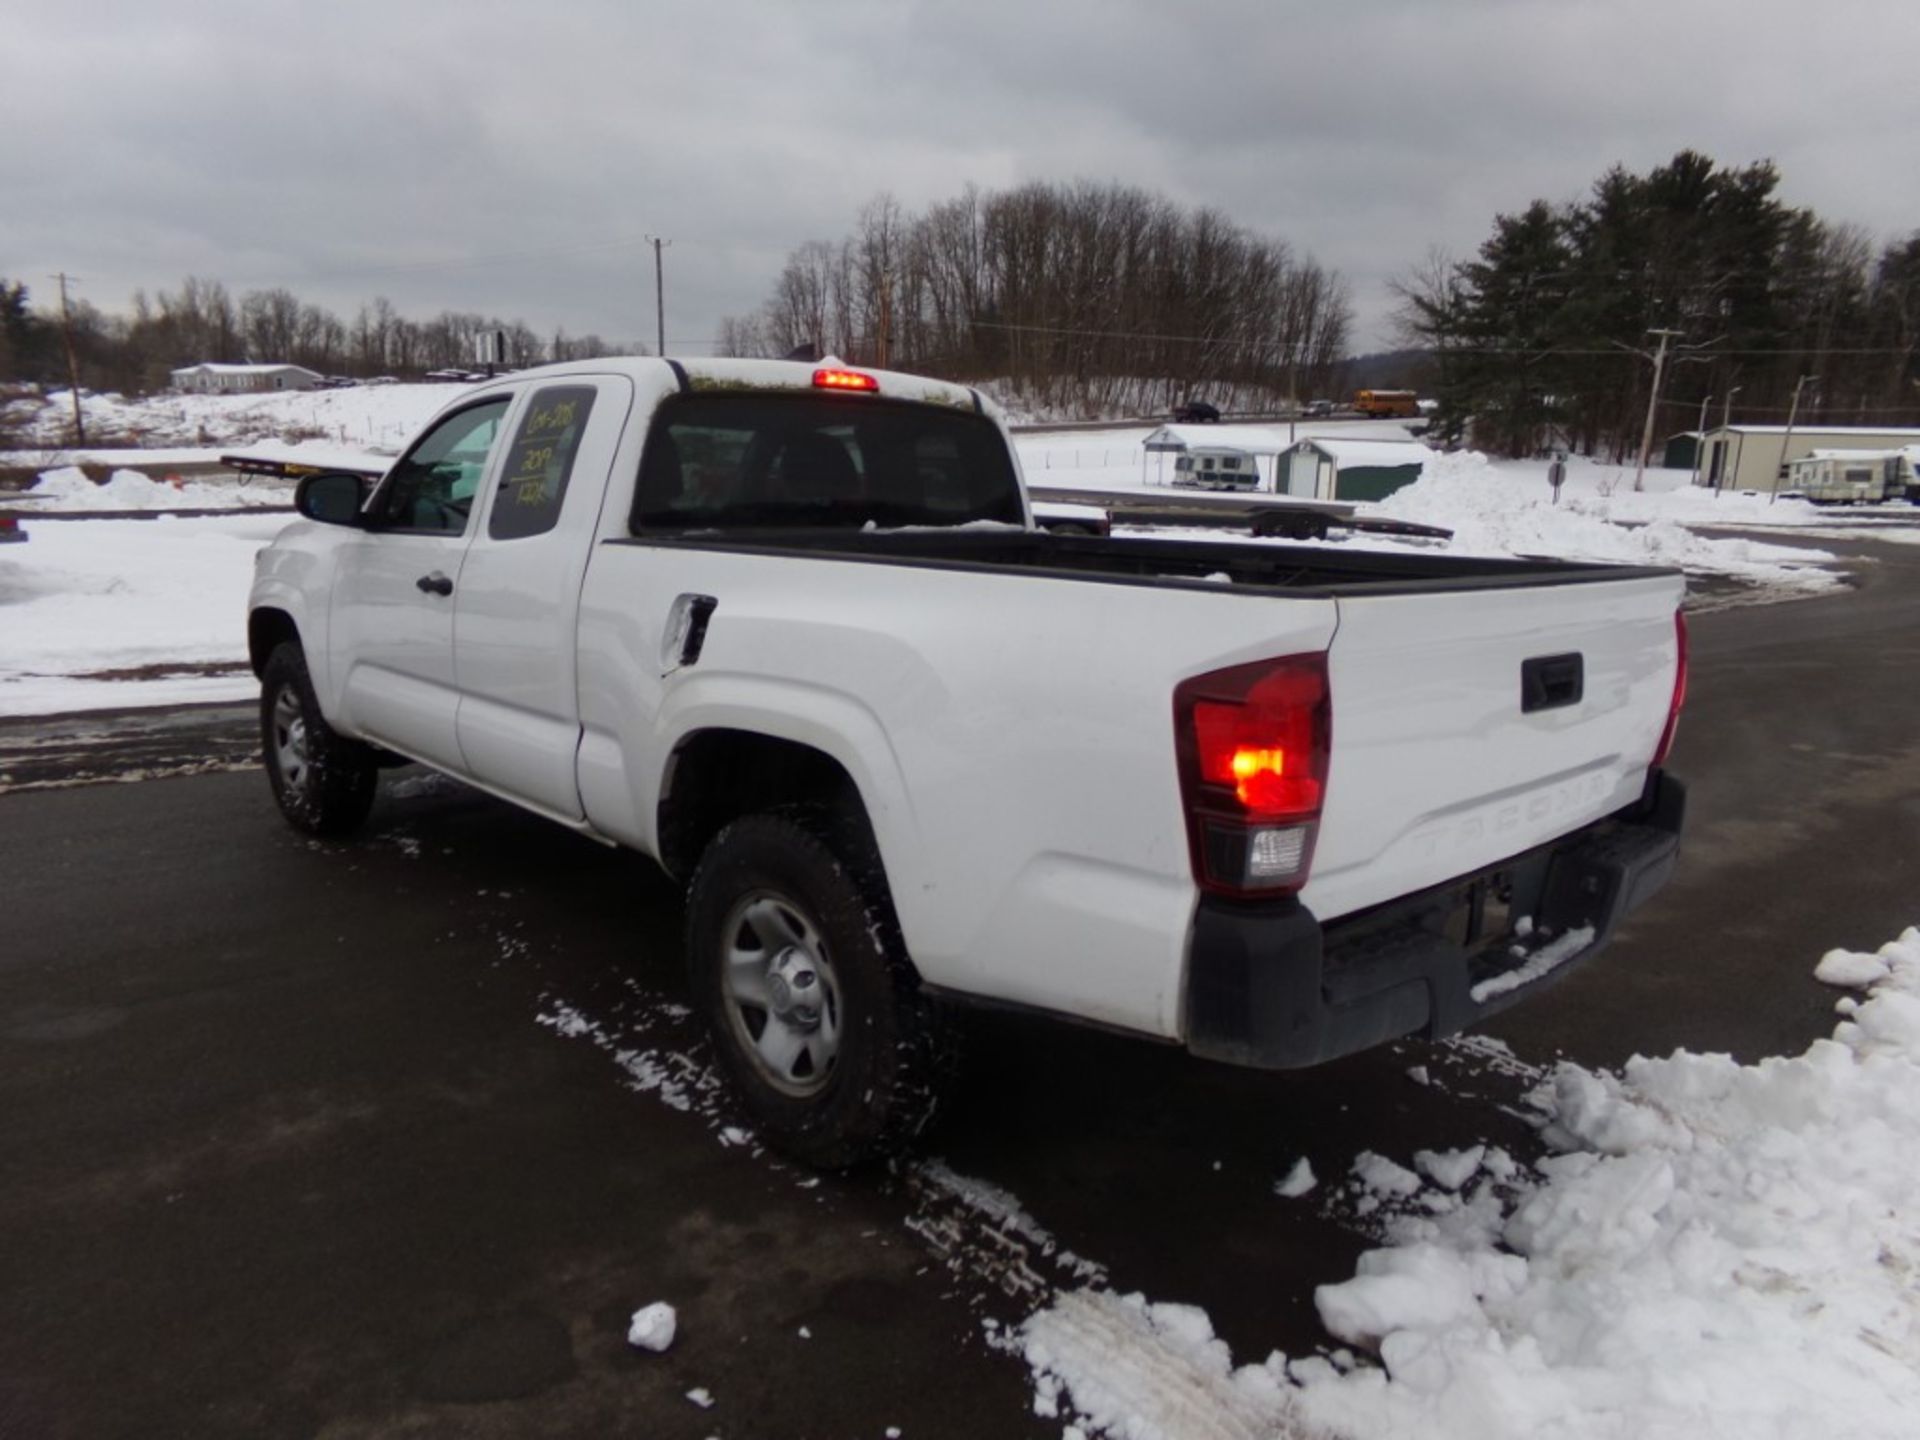 2019 Toyota Tacoma Ext Cab SR, 2wd, White, 122,834 Miles, VIN#5TFRX5GN8KX147601, GAS TANK DOOR IS - Image 2 of 7